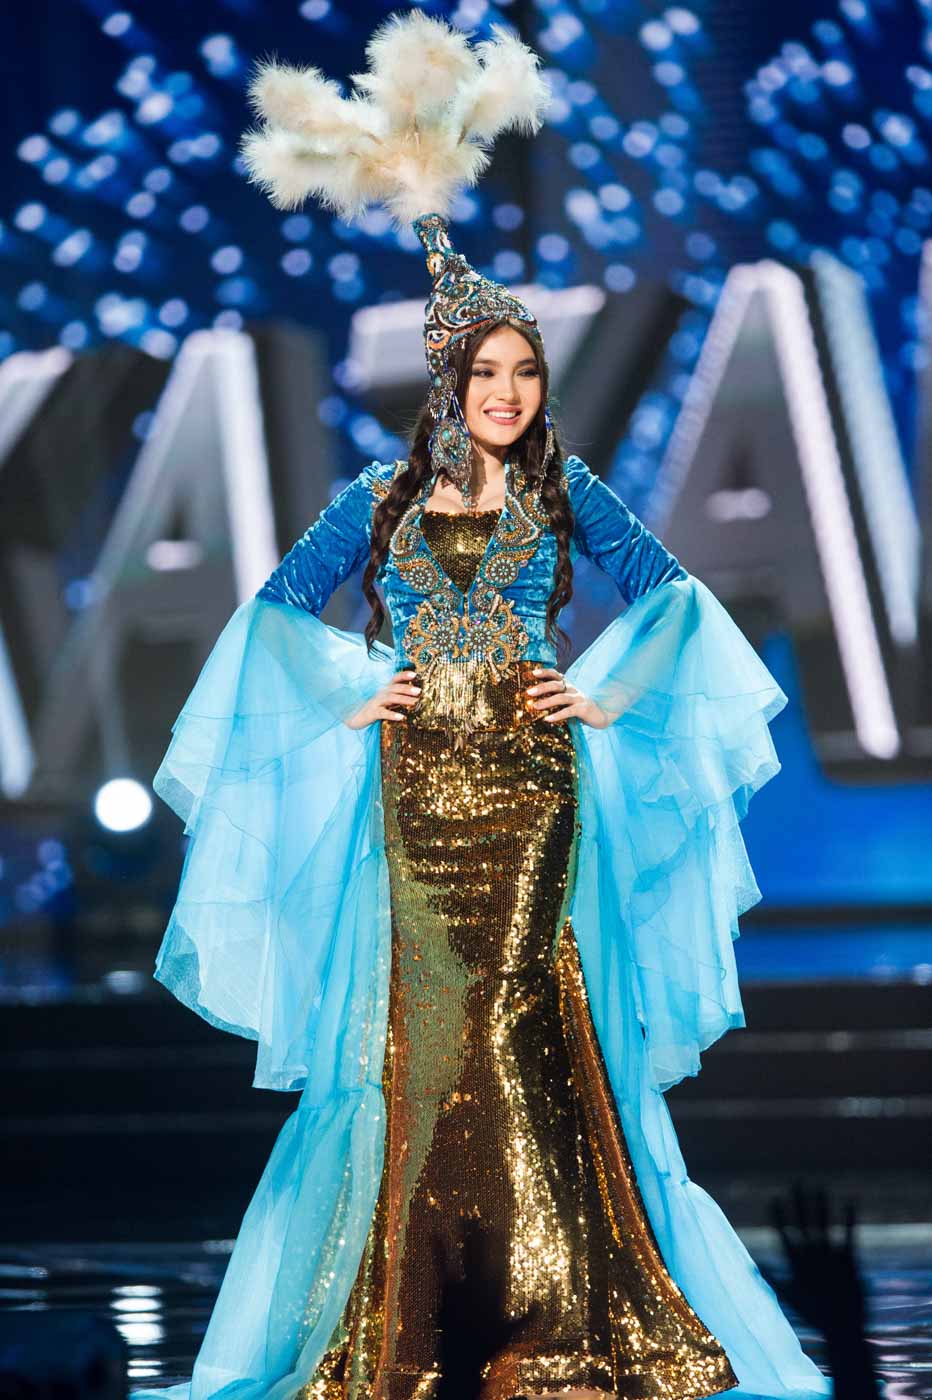 IN PHOTOS: Miss Universe 2016 candidates in their national costumes